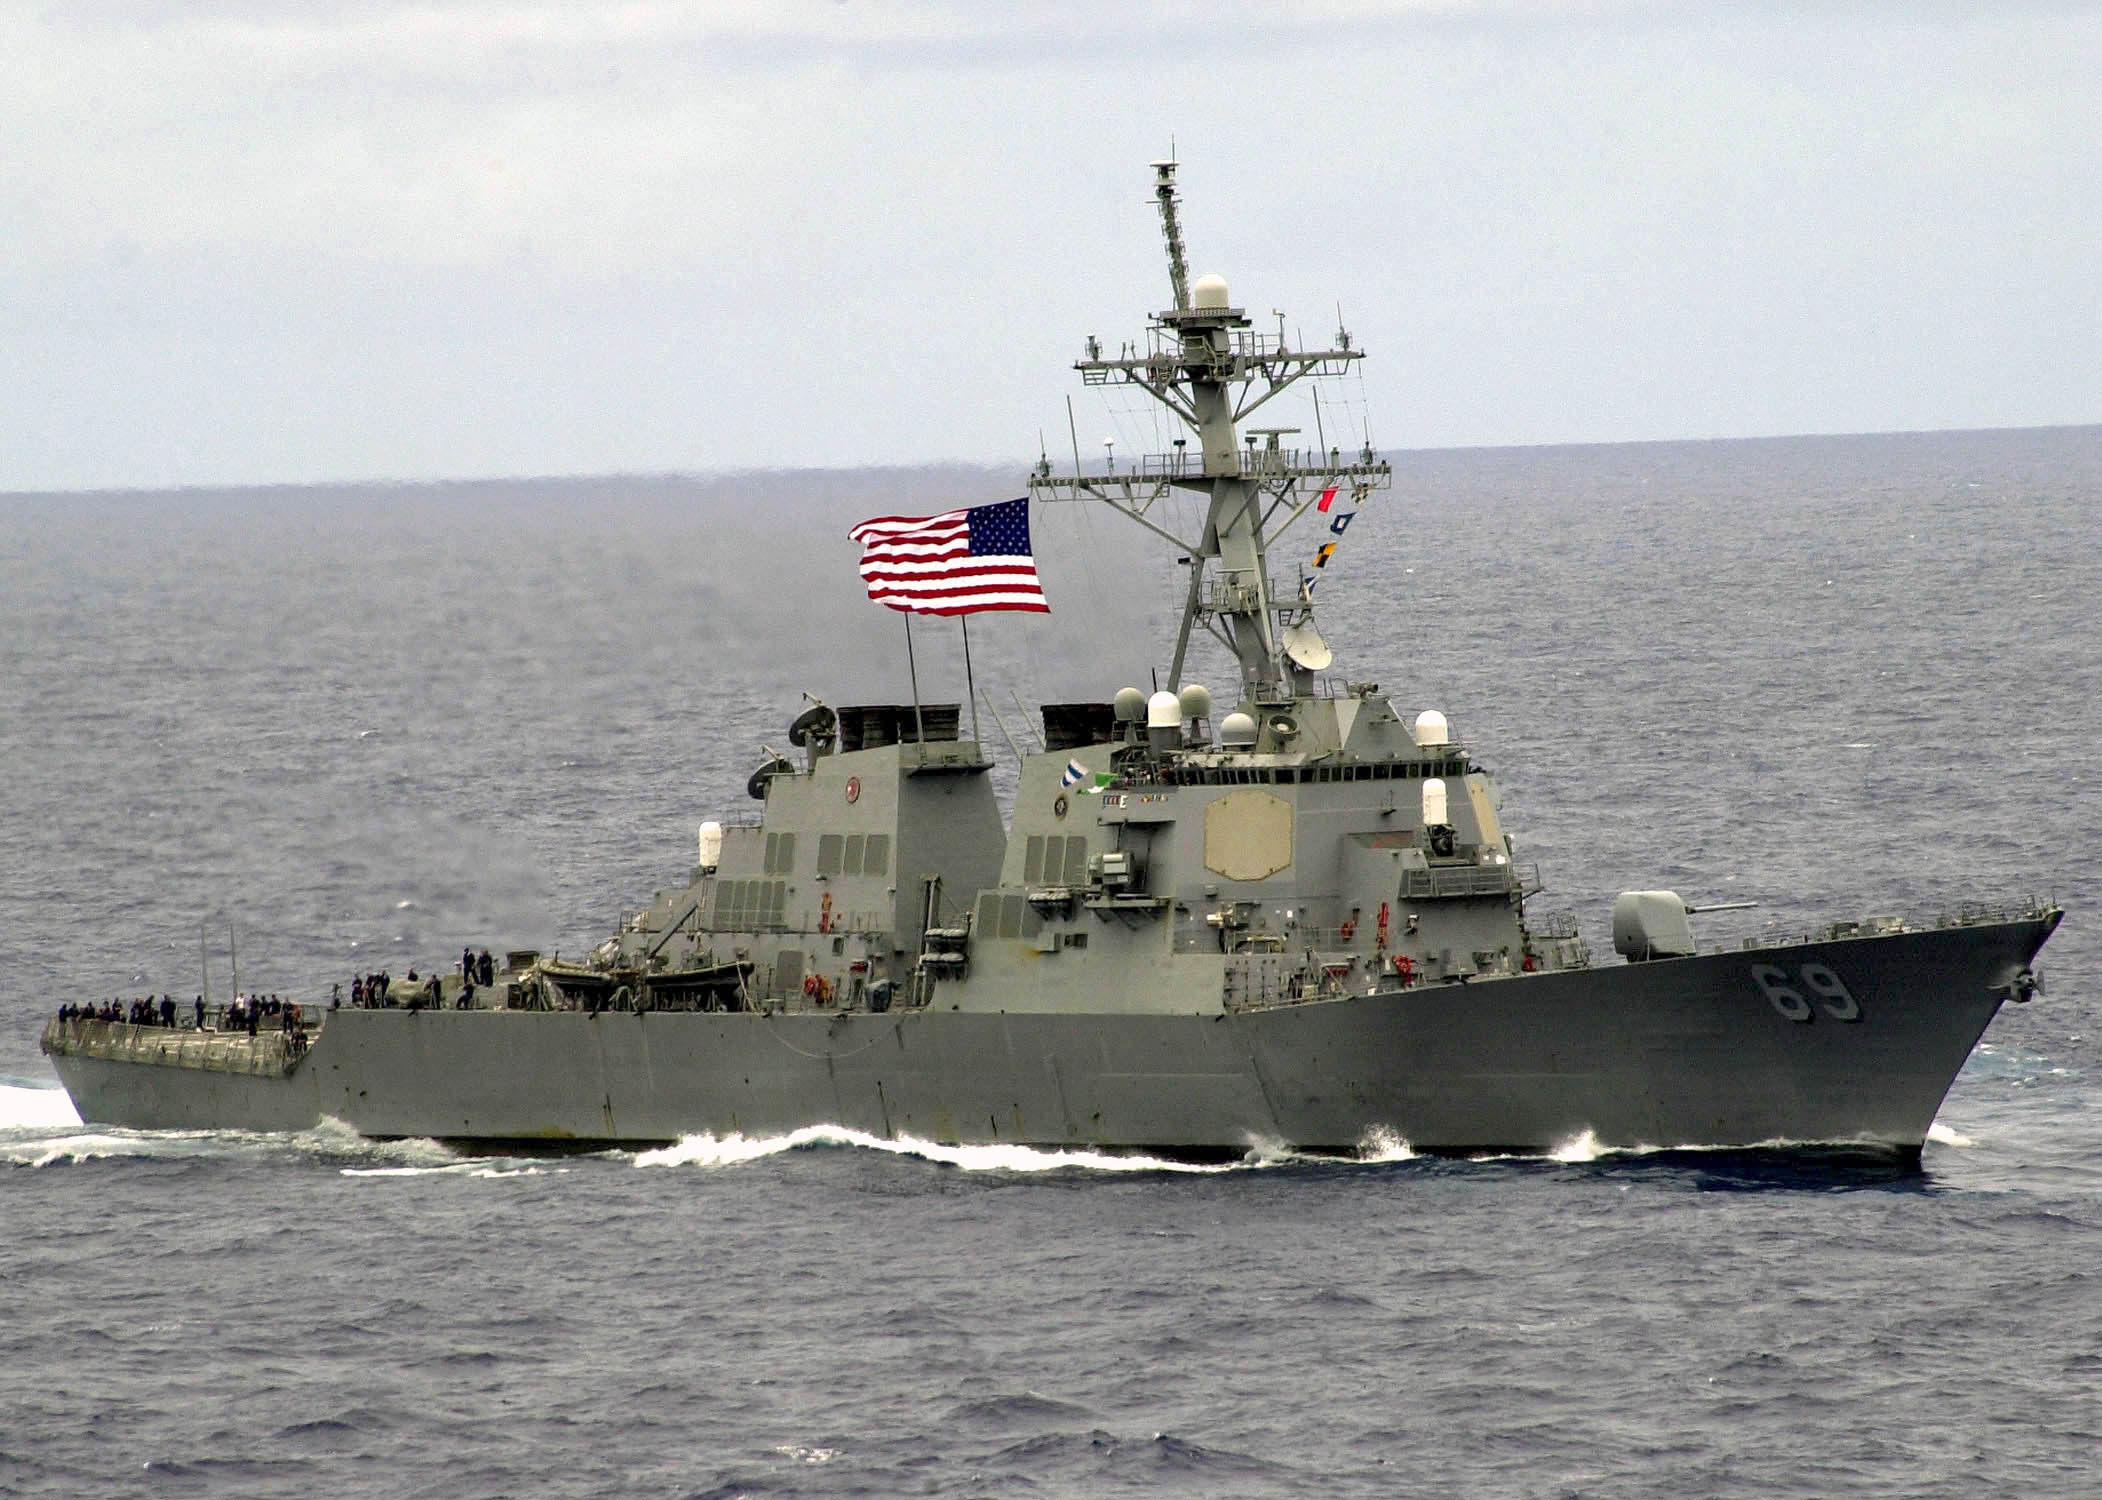 China drives US destroyer USS Milius away from its shores - Pentagon denies